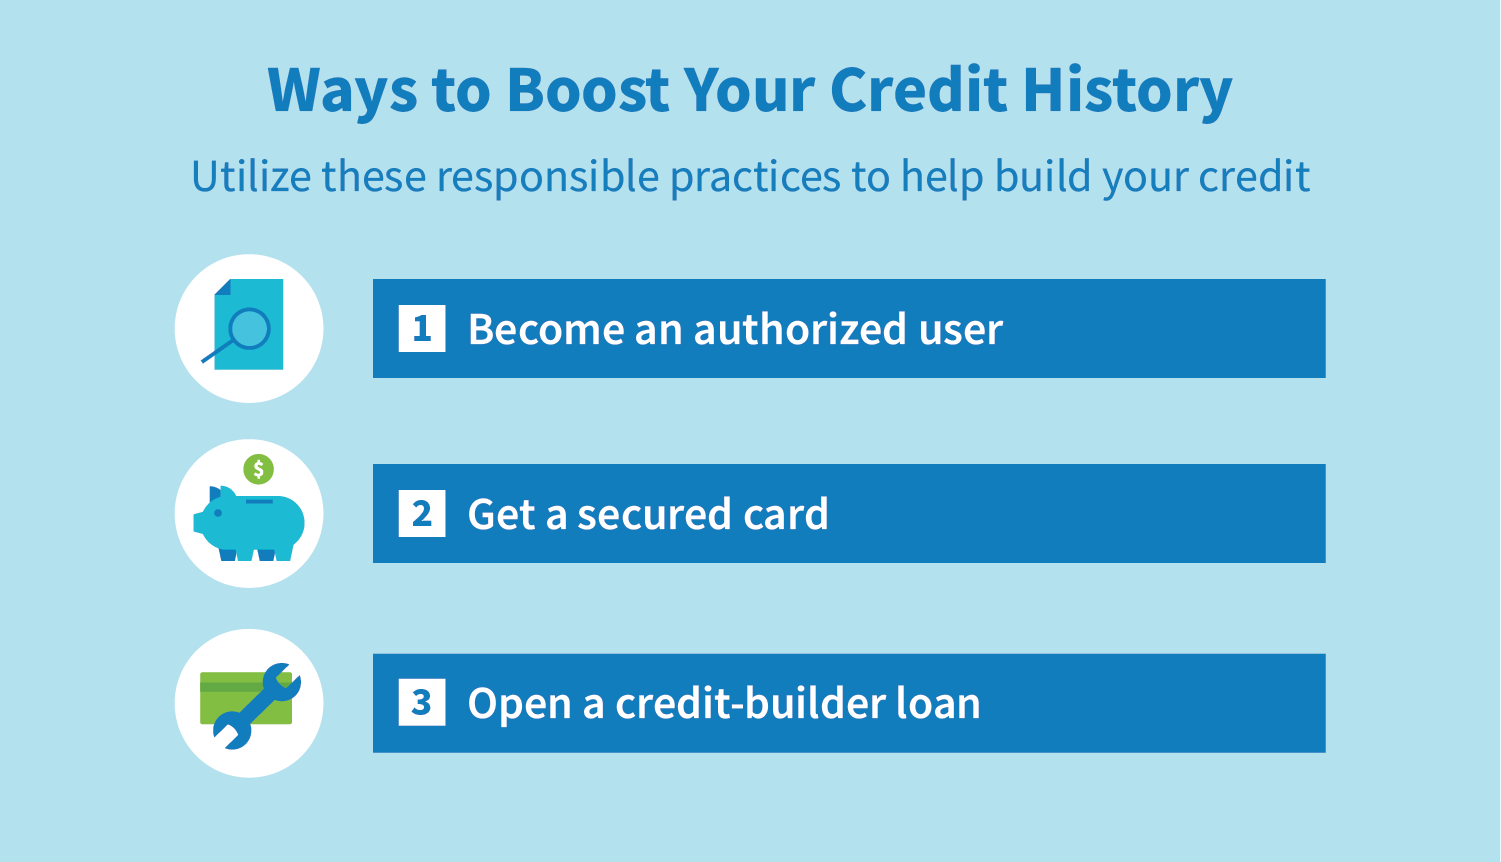 Ways to Boost Your Credit History: Utilize these responsible practices to help build your credit. 1. Become an authorized user. 2. Get a secured card. 3. Open a credit-builder loan.